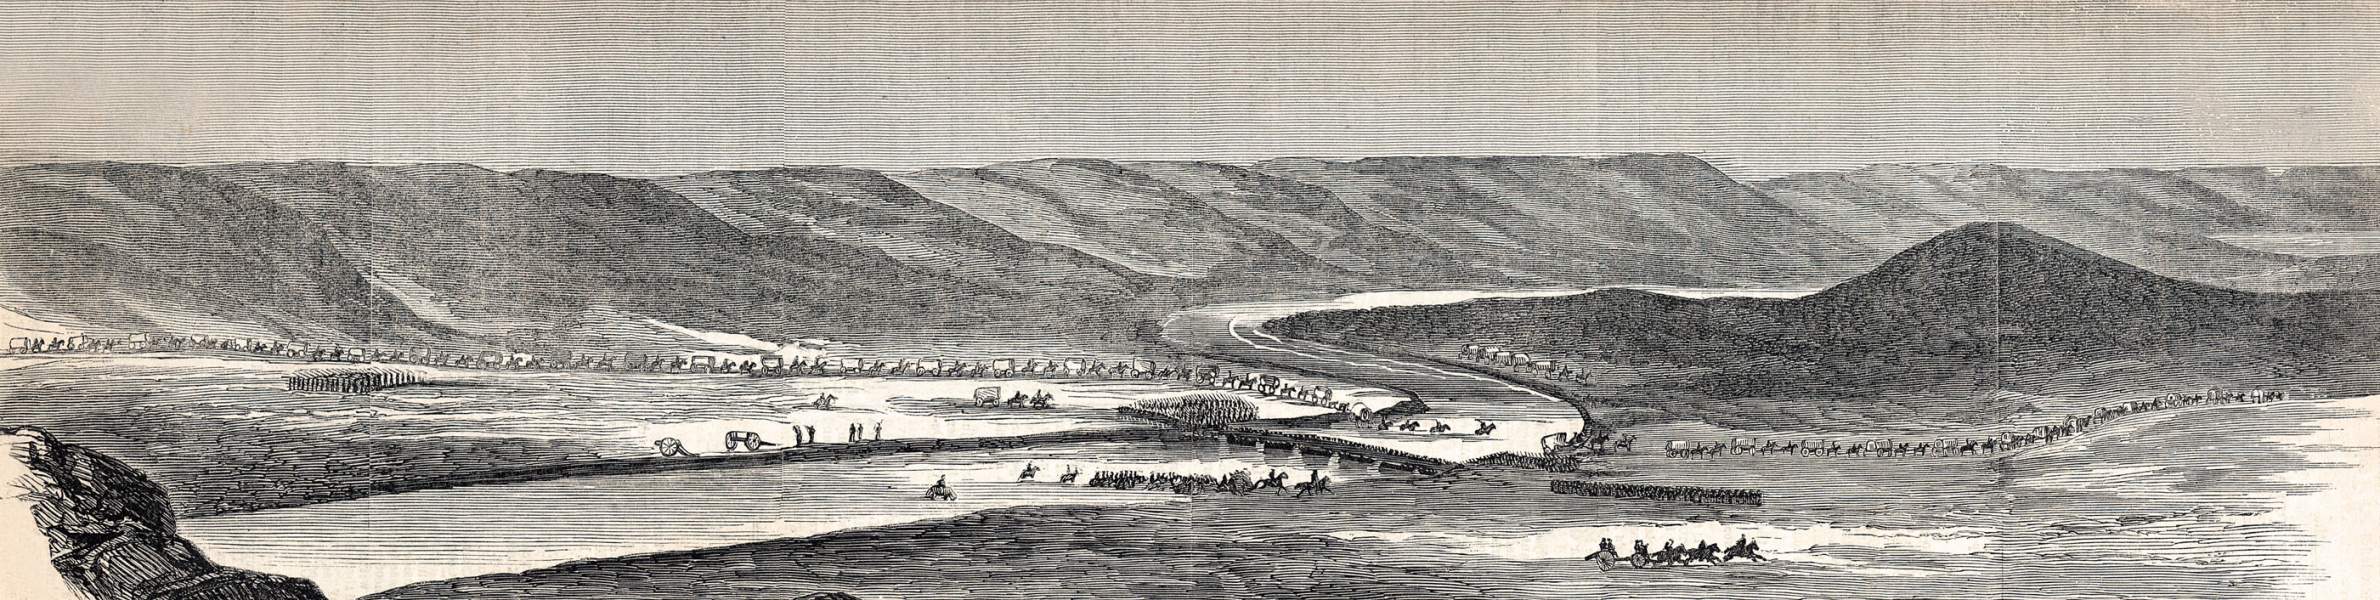 General Sibley's Expedition marching to Big Mound, Dakota Territory, July 20,1863, artist's impression, zoomable image